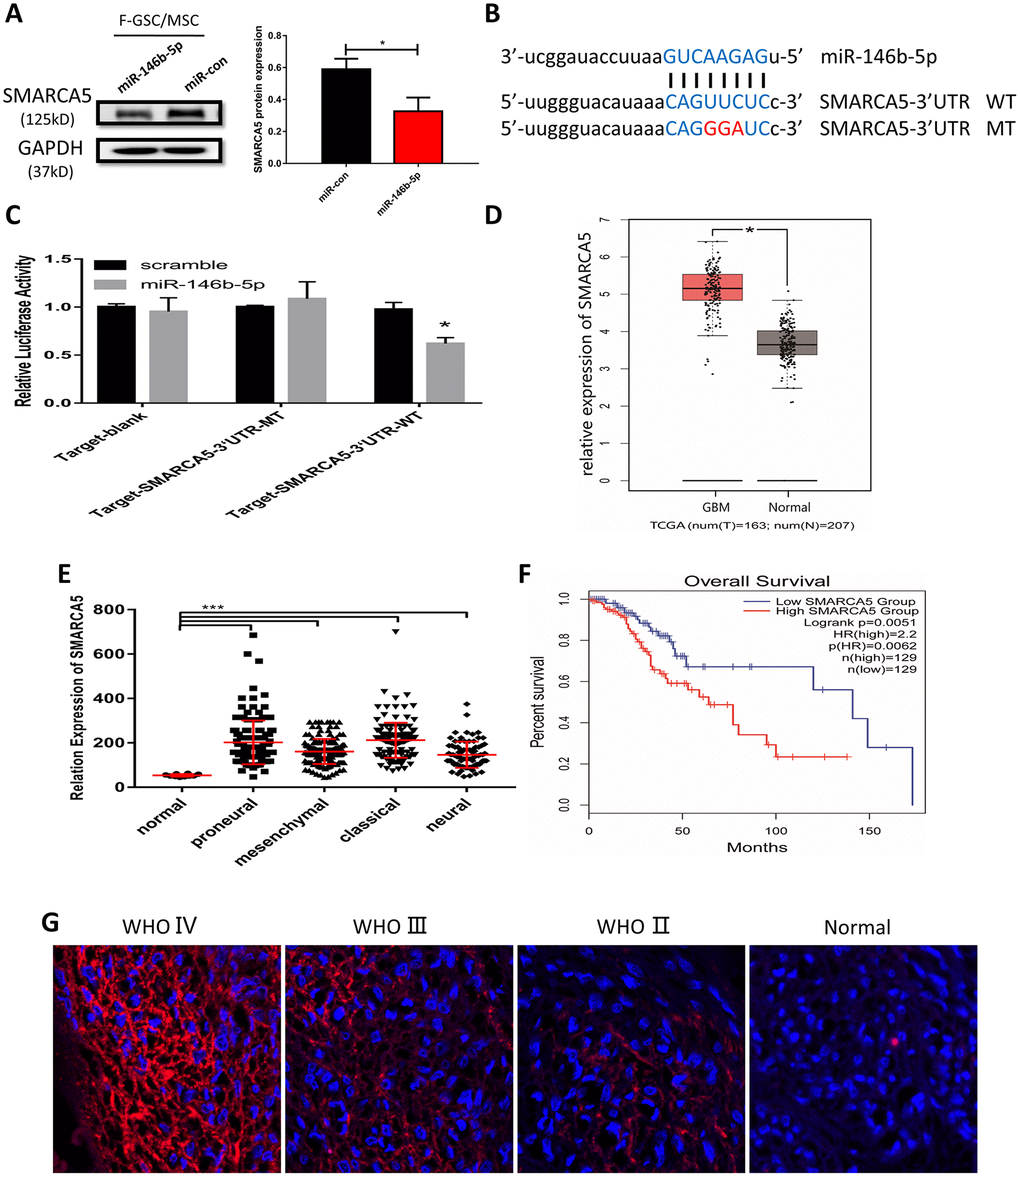 MiR-146b-5p negatively regulates SMARCA5, which is highly expressed in high-grade gliomas. (A) Western blot analysis of SMARCA5 expression in F GSC/MSCs overexpressing miR-146b-5p. (B) Predicted binding site between miR 146b-5p and SMARCA5. Wild type (WT) and mutant (MT) SMARCA5 vectors were constructed for luciferase assays. (C) Luciferase activity indicated miR-146b-5p bound directly to the 3’ UTR of SMARCA5. (D) SMARCA5 expression in glioblastoma and normal tissue from a TCGA dataset. (E) SMARCA5 expression in different glioblastoma subtypes in the TCGA dataset. (F) Overall survival among glioma patients in a low SMARCA5 and high SMARCA5 group. (G) Immunofluorescence analysis of SMARCA5 expression in different WHO grade gliomas.